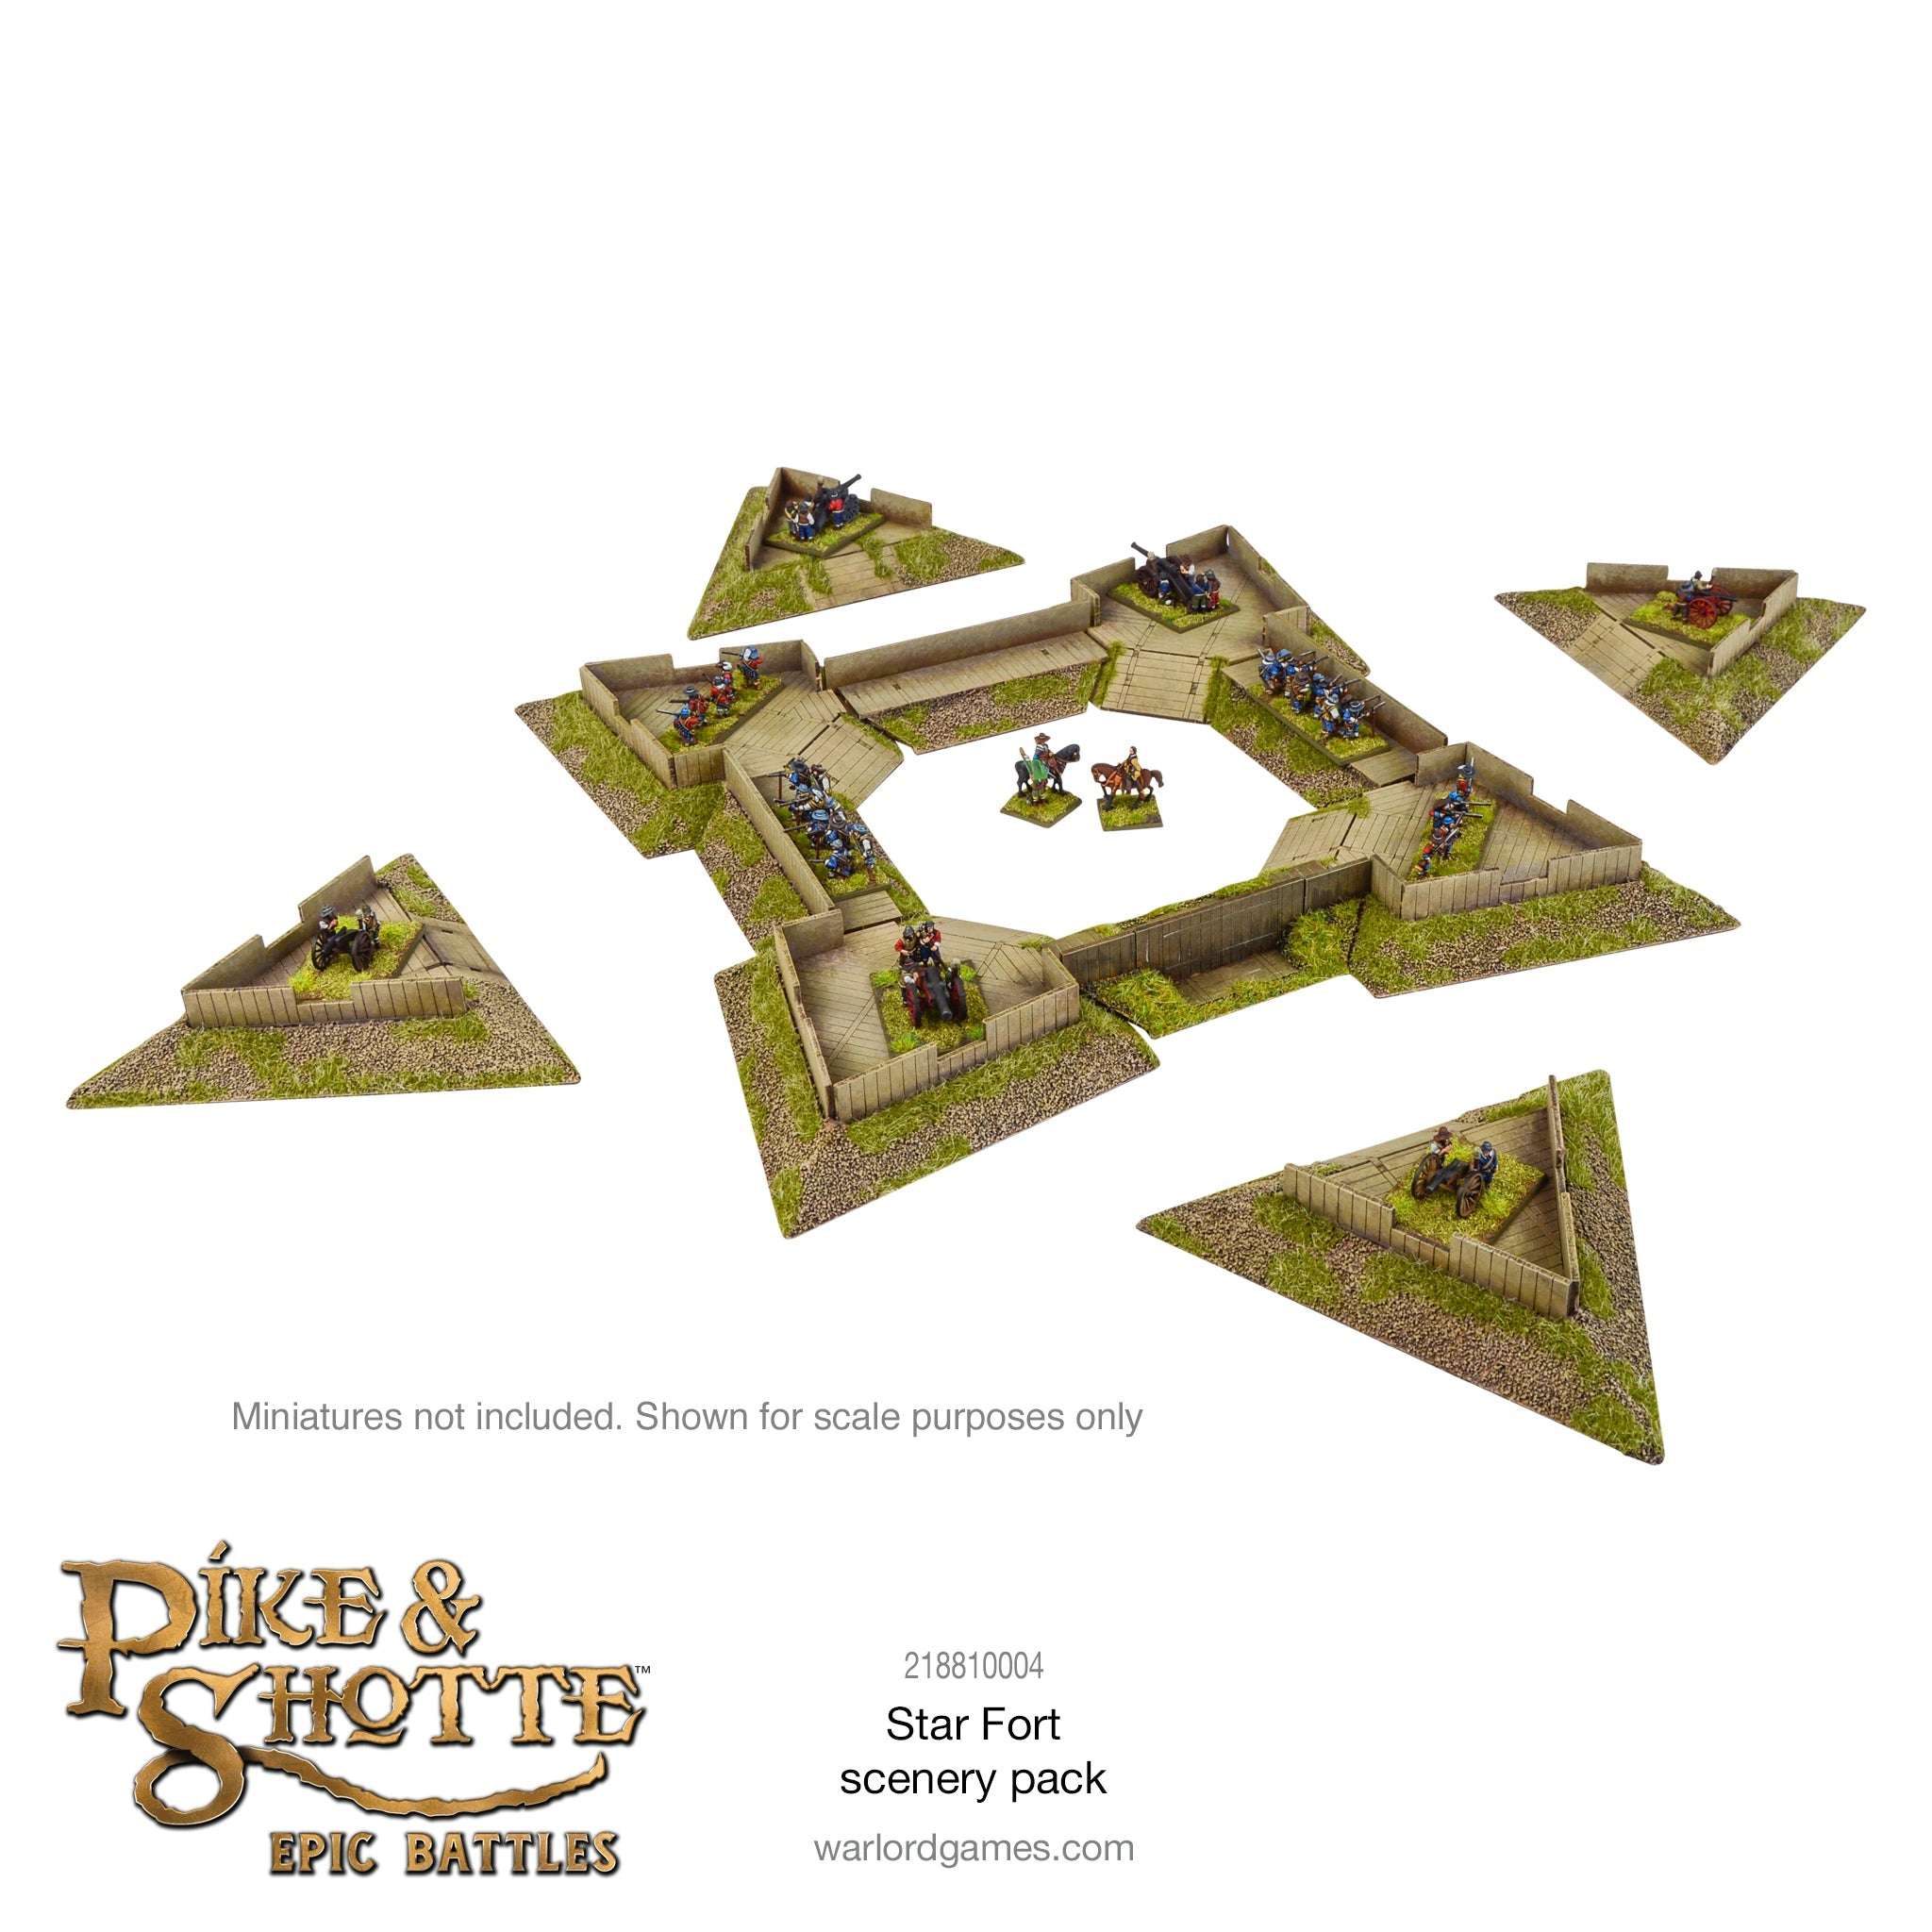 Pike & Shotte Epic Battles - Star Fort with Ravelins Scenery Pack